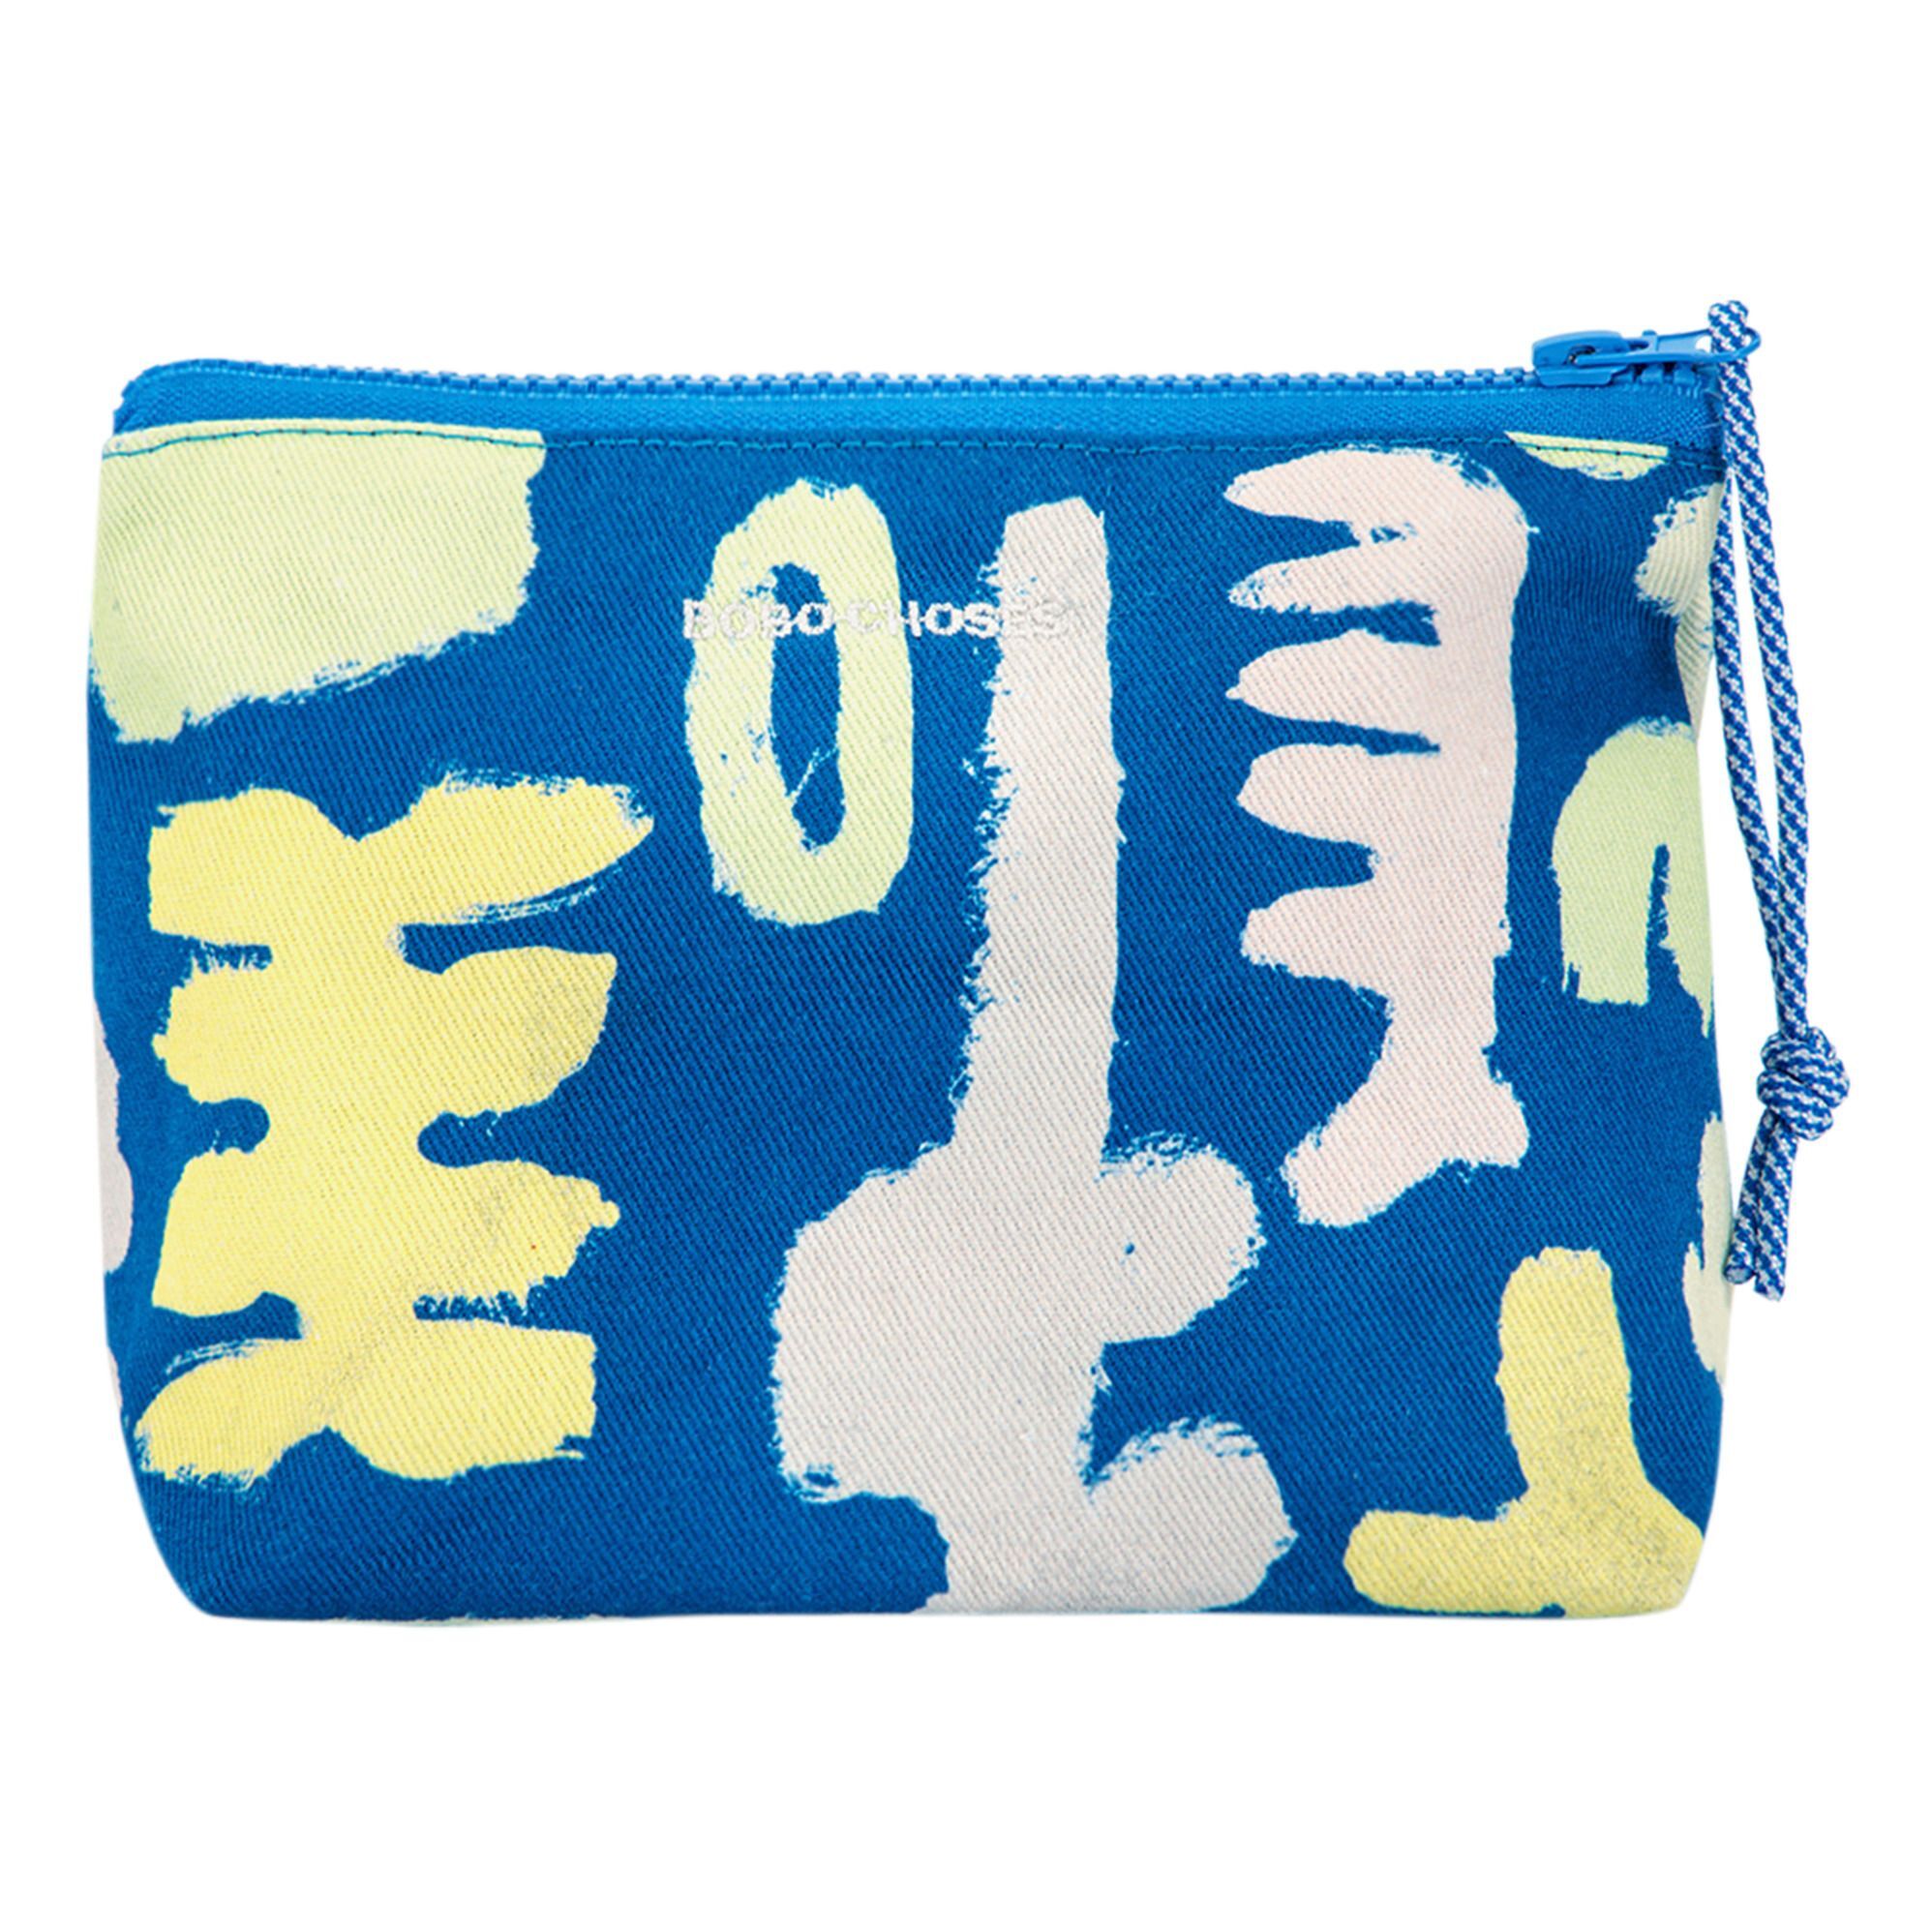 Bobo Choses Carnival clutch bag - Women's collection - Blue one size Women